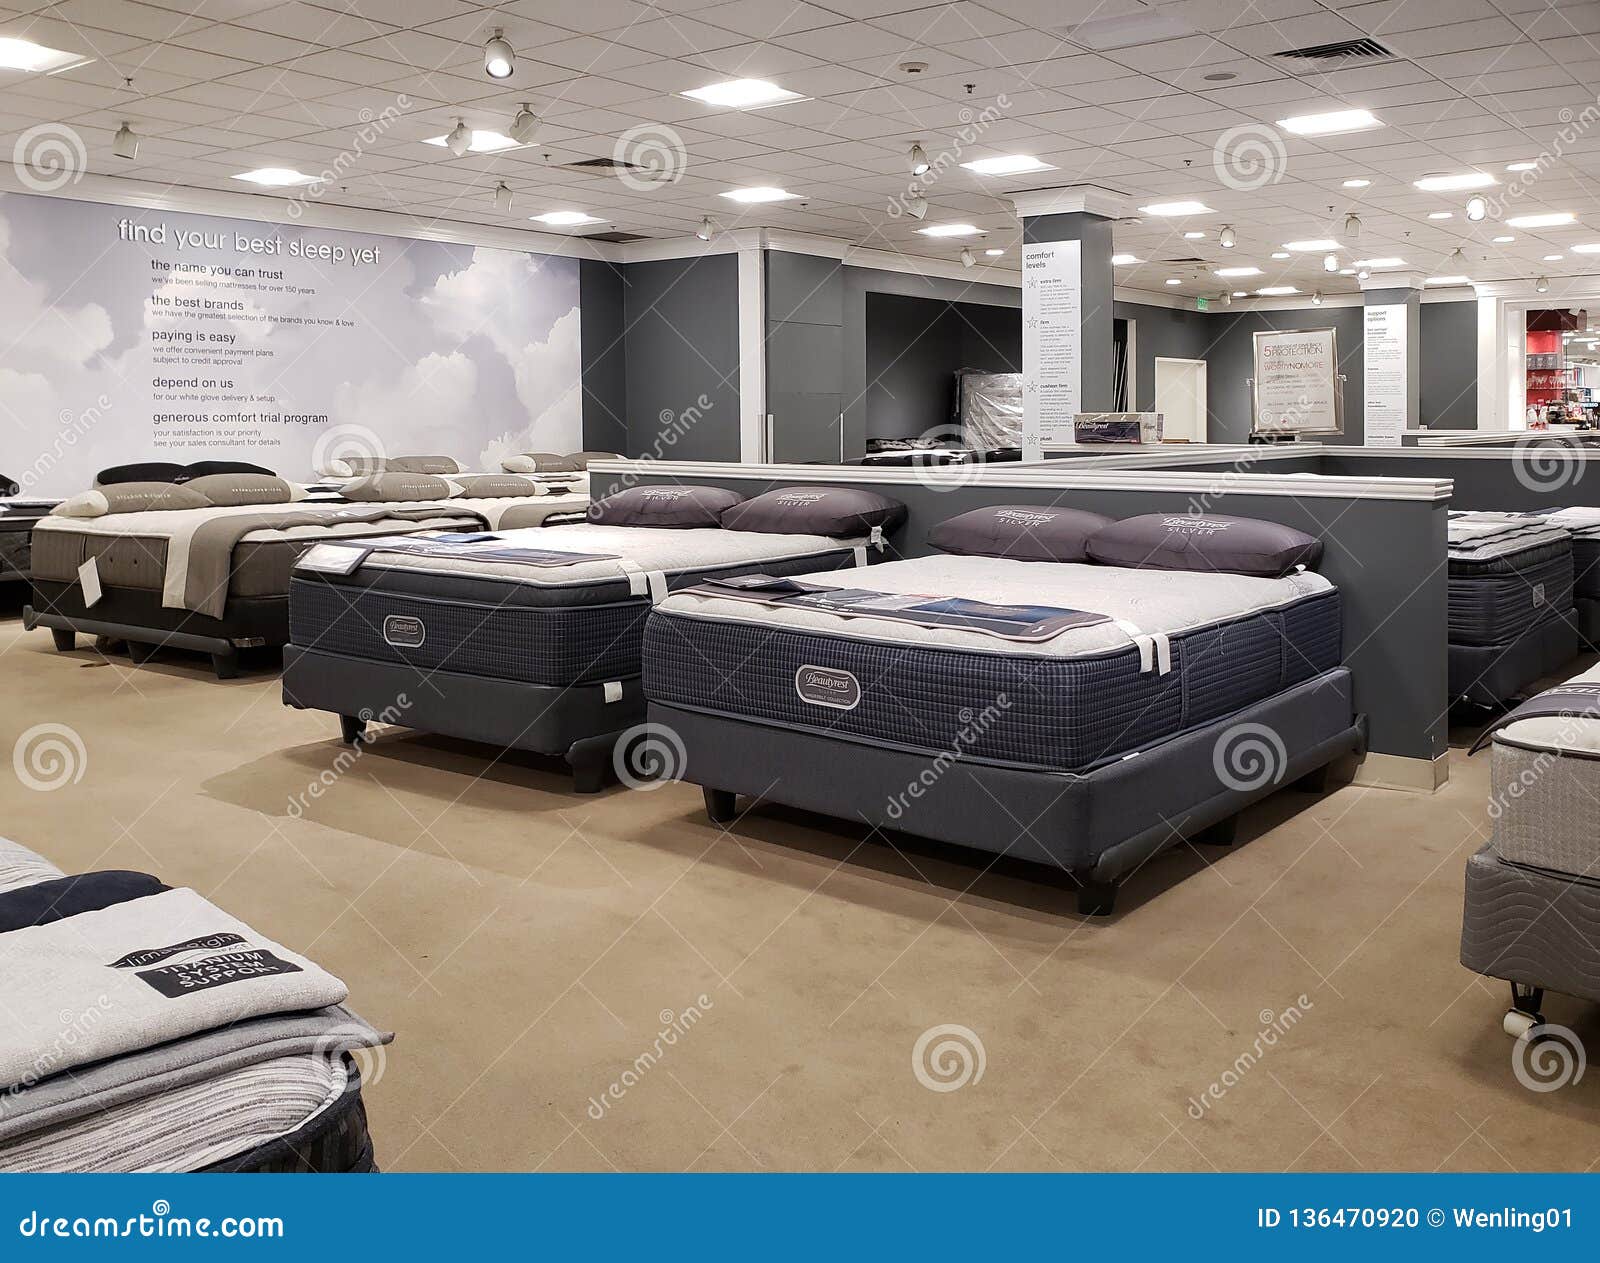 nice mattresses for sale